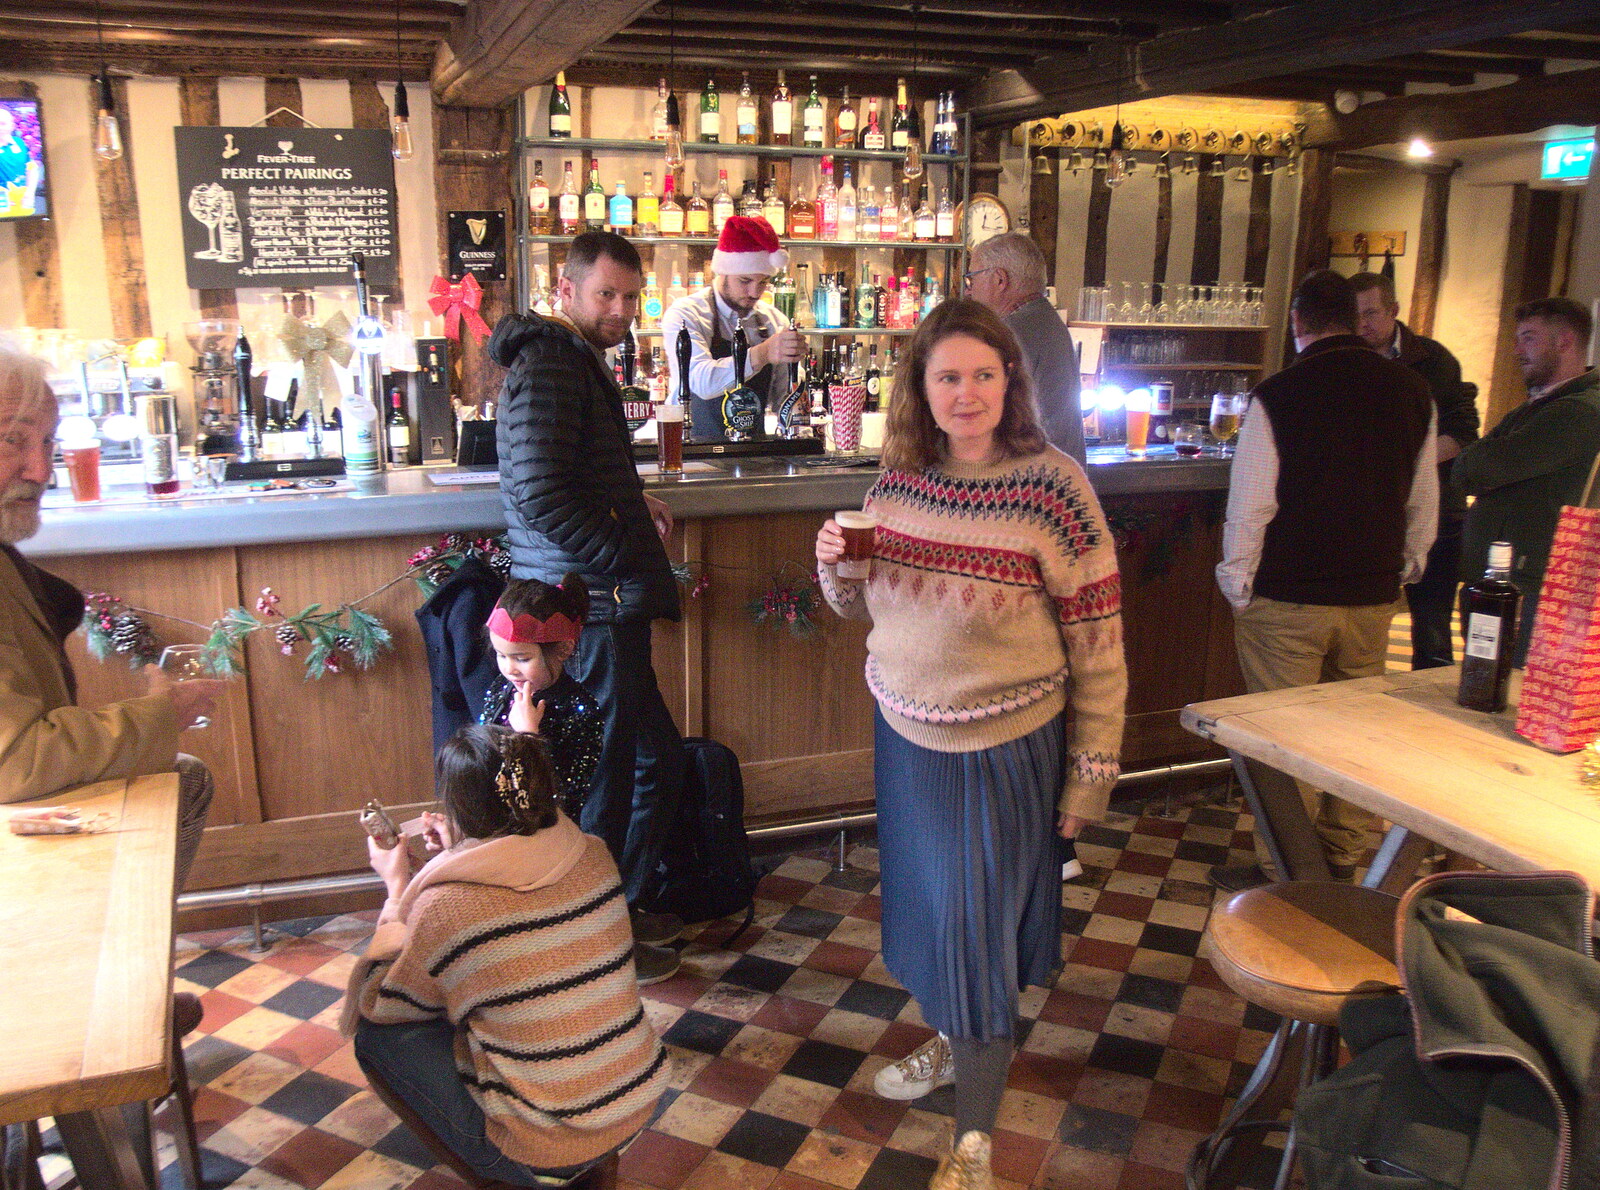 Isobel with a half pint in the Oaksmere's bar from Christmas Day and Other Stuff, Diss, Brome and Norwich - 25th December 2022